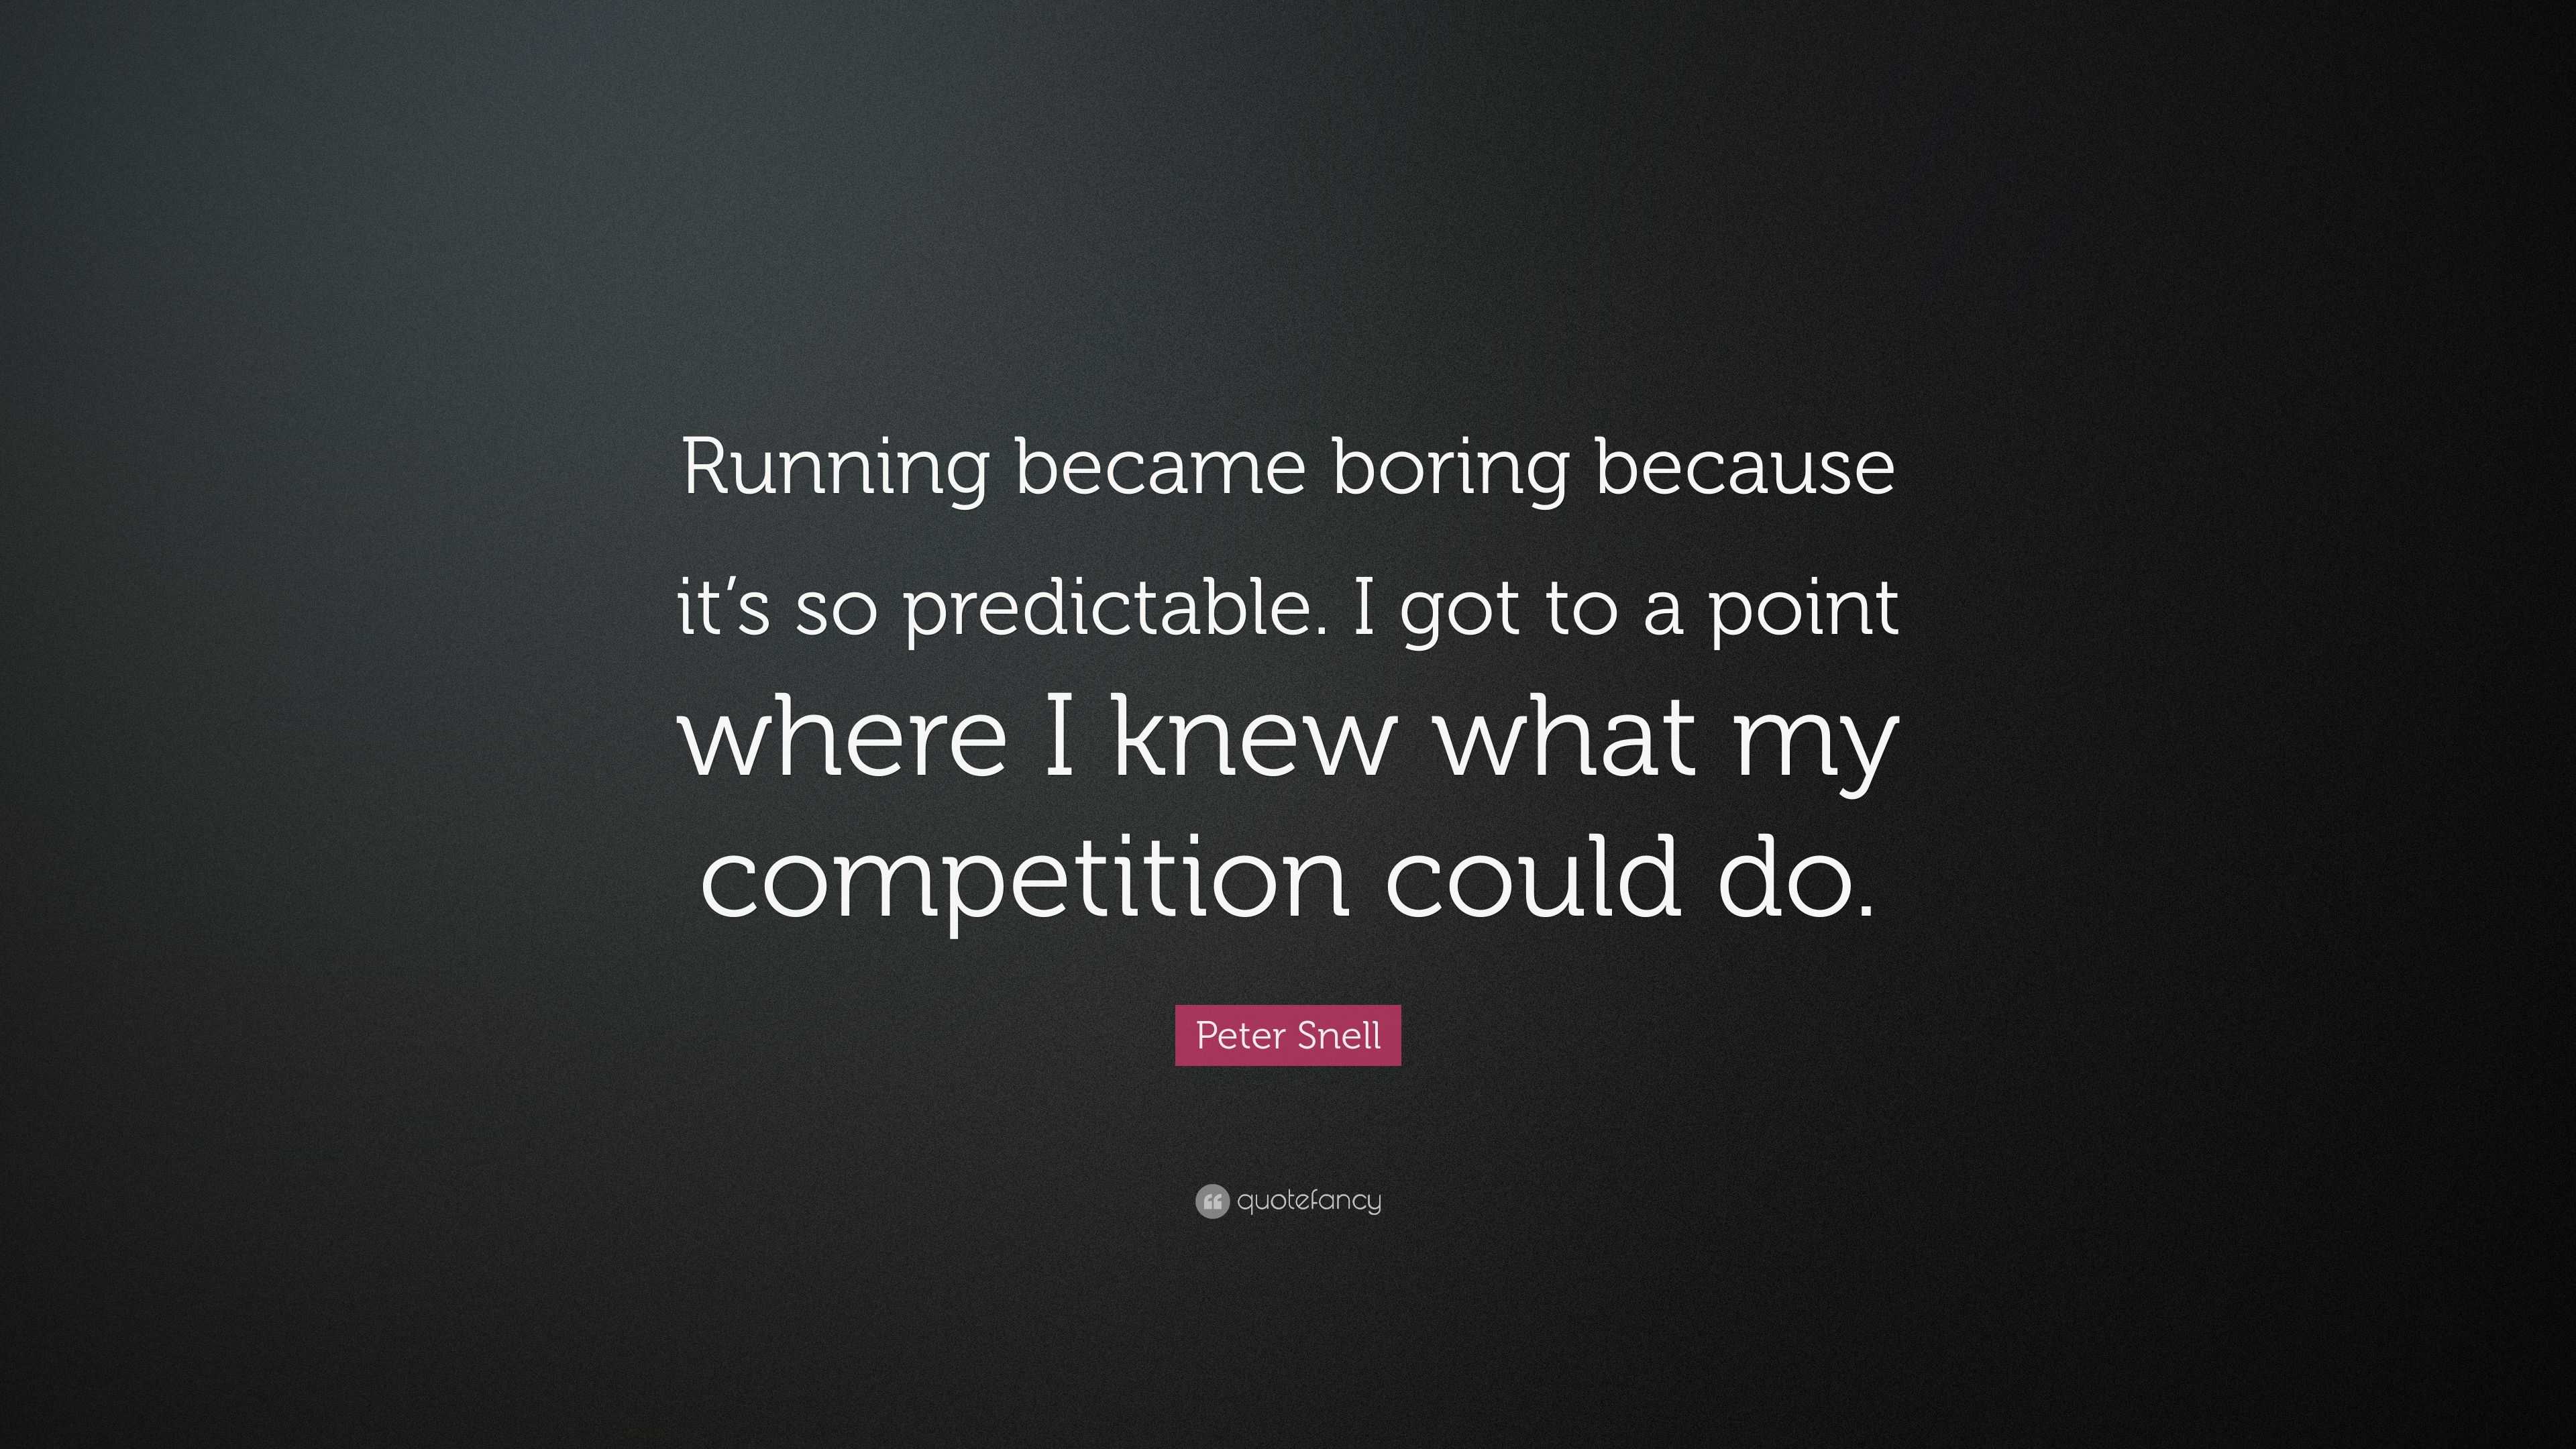 Peter Snell Quote: “Running became boring because it’s so predictable ...